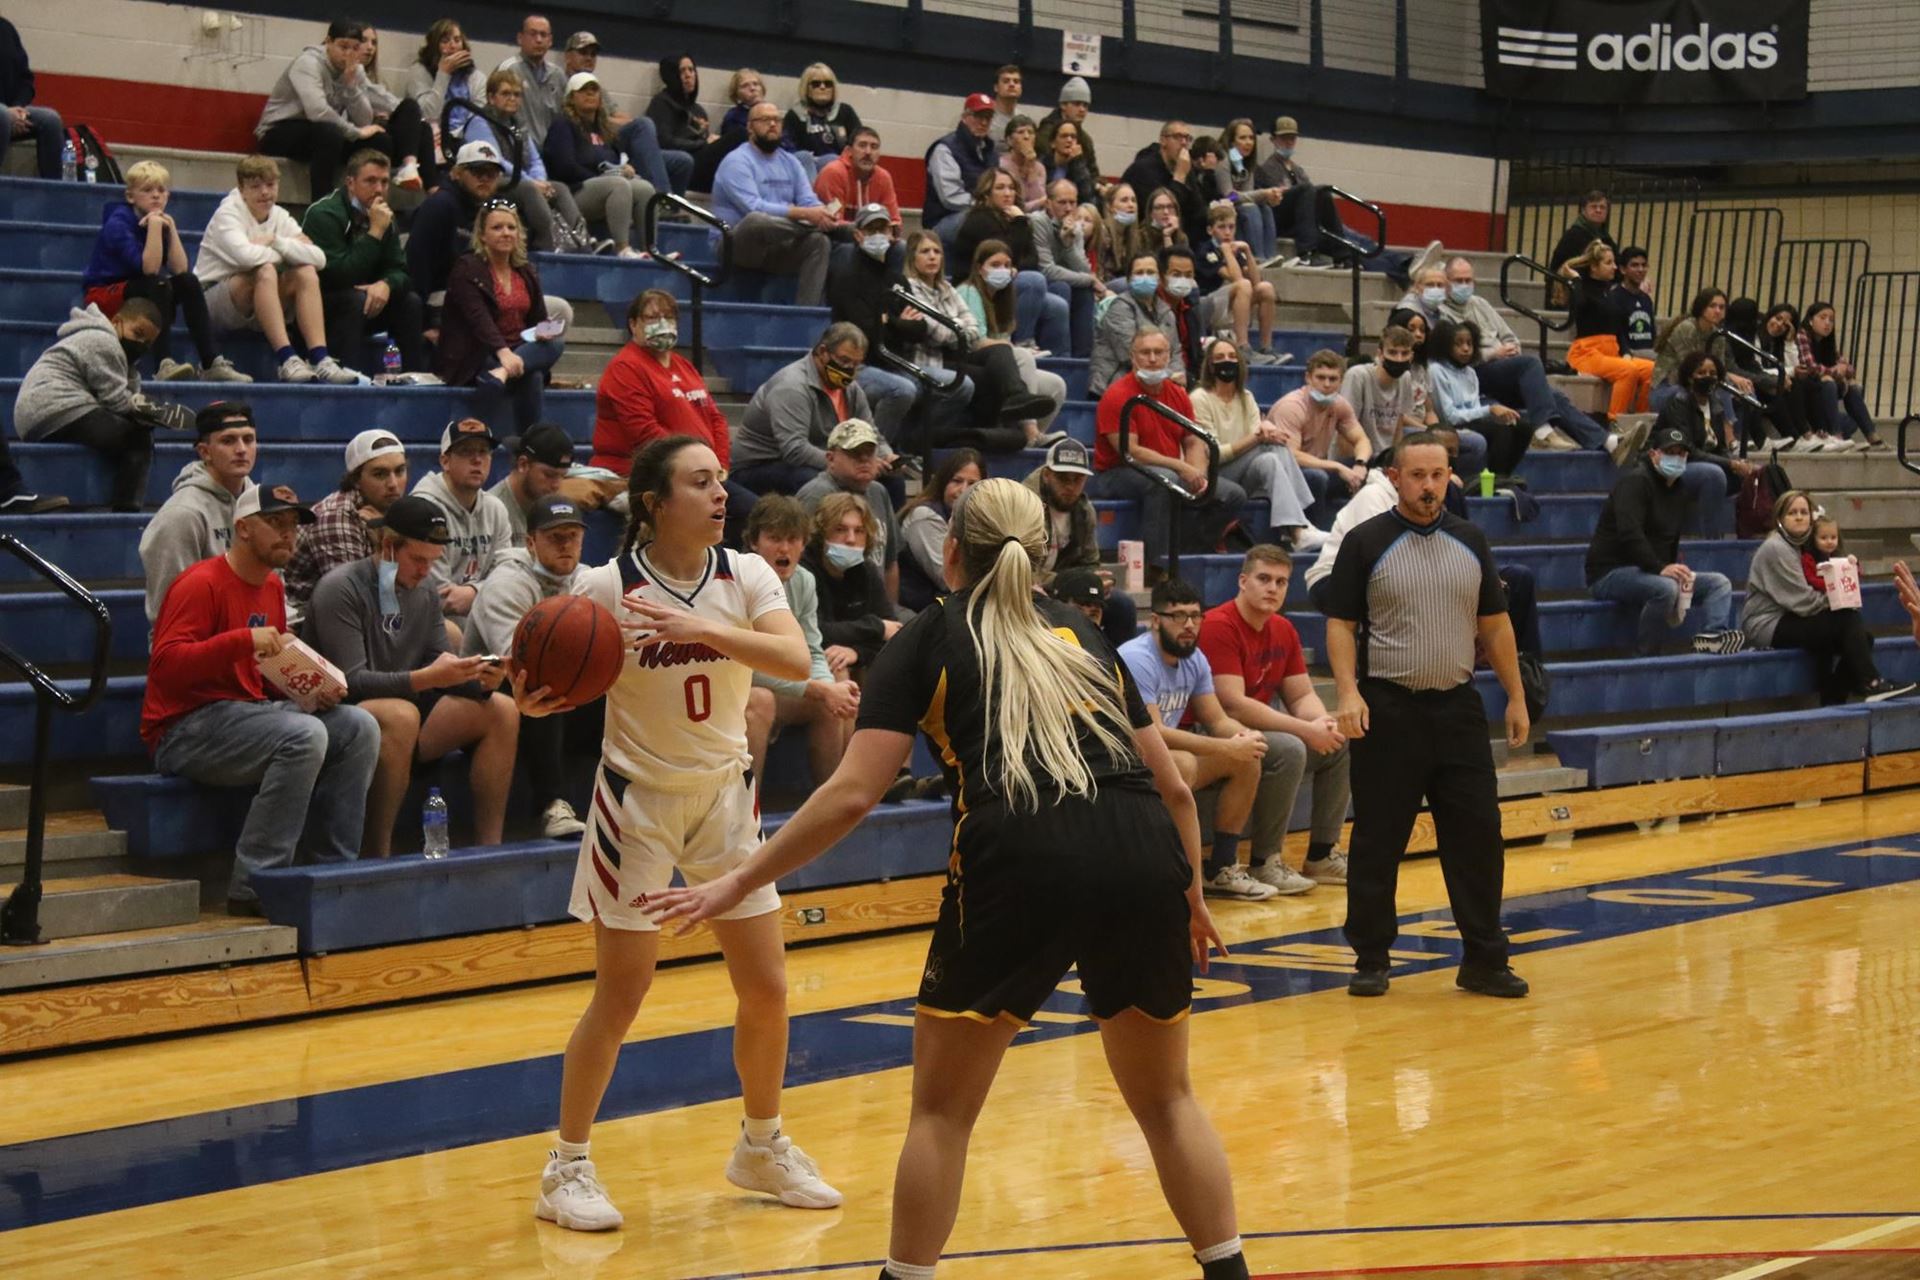 Women’s basketball opens season at home: Welcome to Dortland